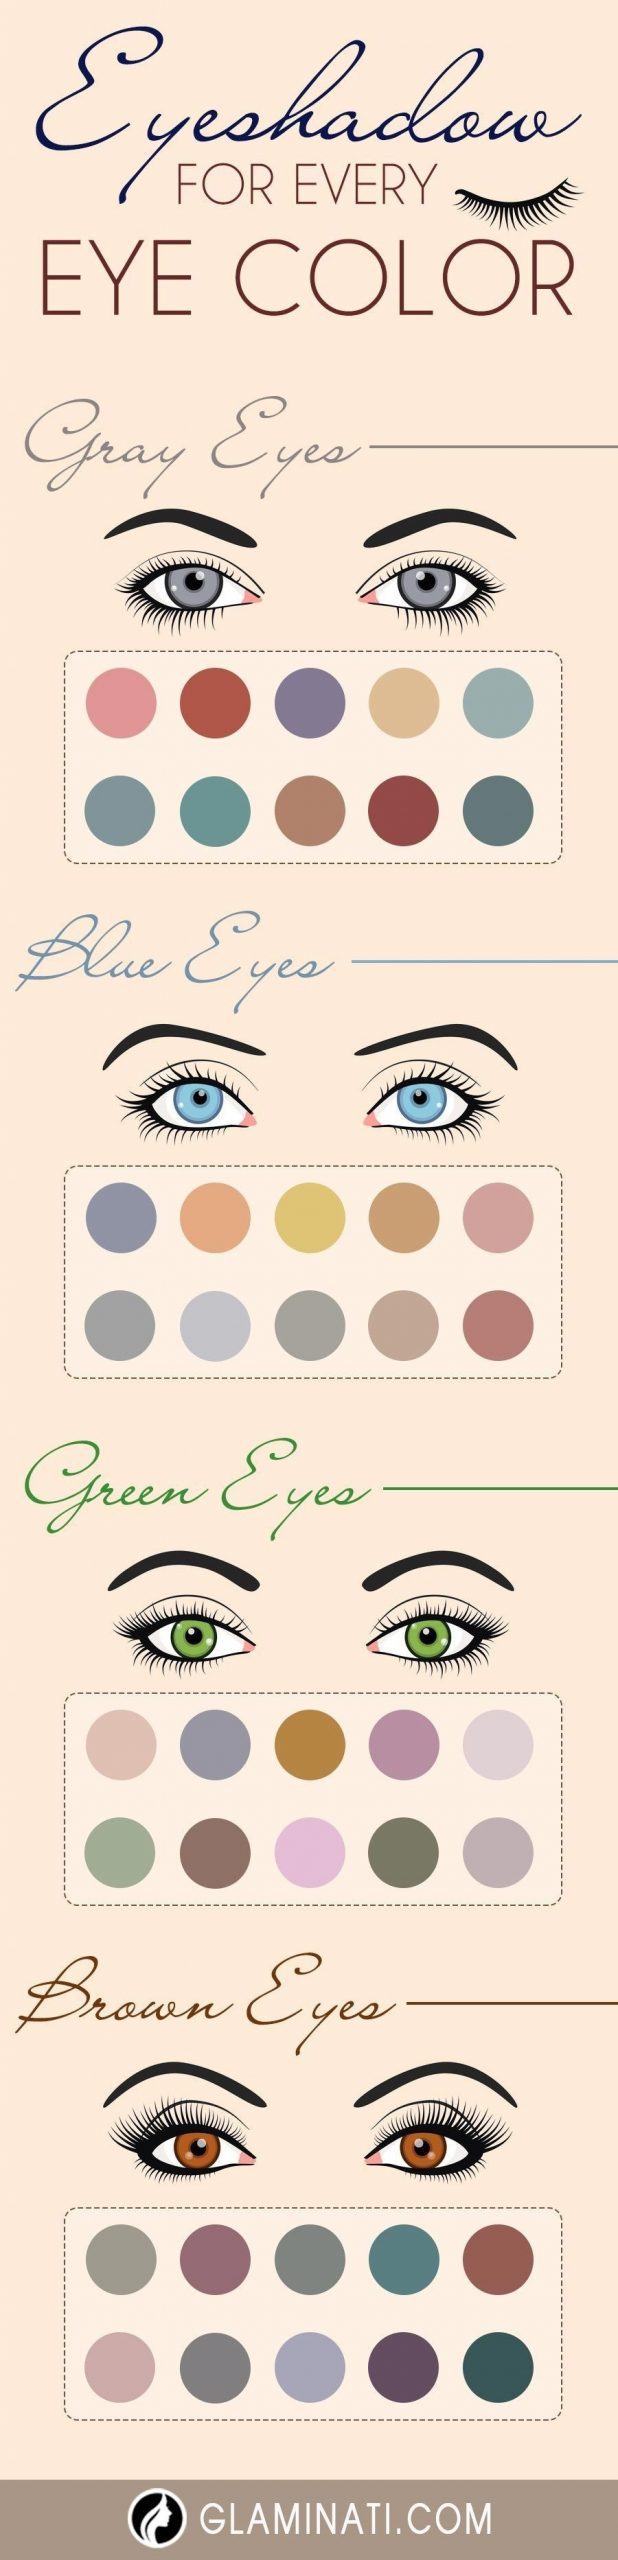 Most Magical Makeup Ideas For Gray Eyes ☆ See More: Http with Eyeshadow For Blue Green Gray Eyes